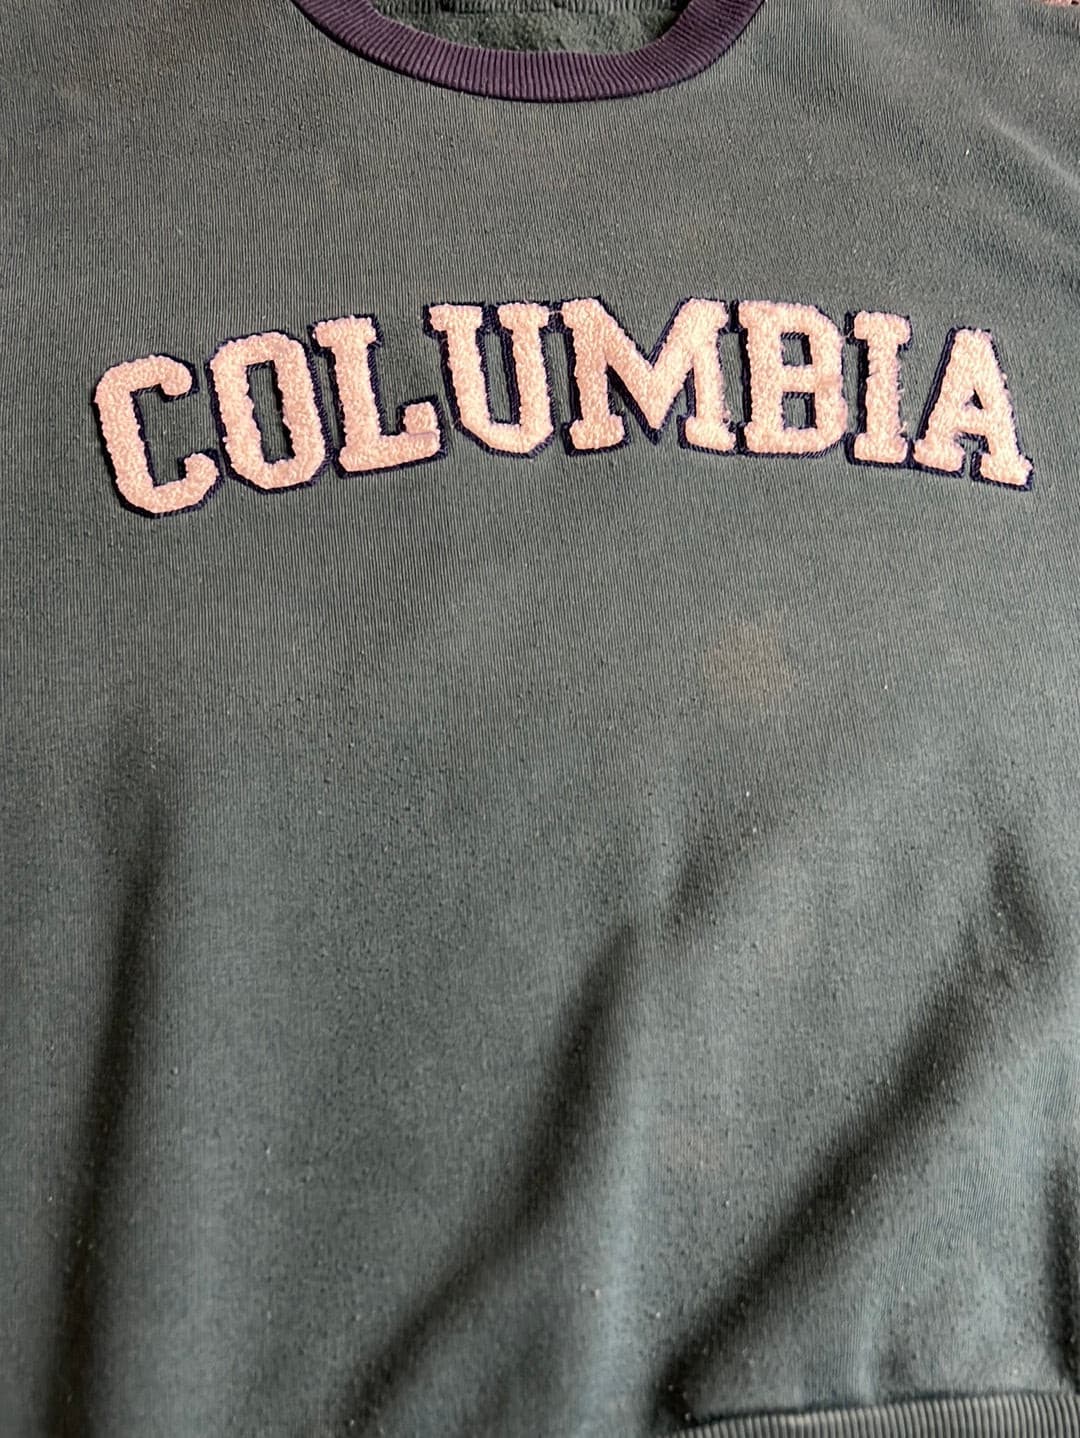 Columbia Spellout Sweatshirt Green // X-Small - RHAGHOUSE VINTAGE